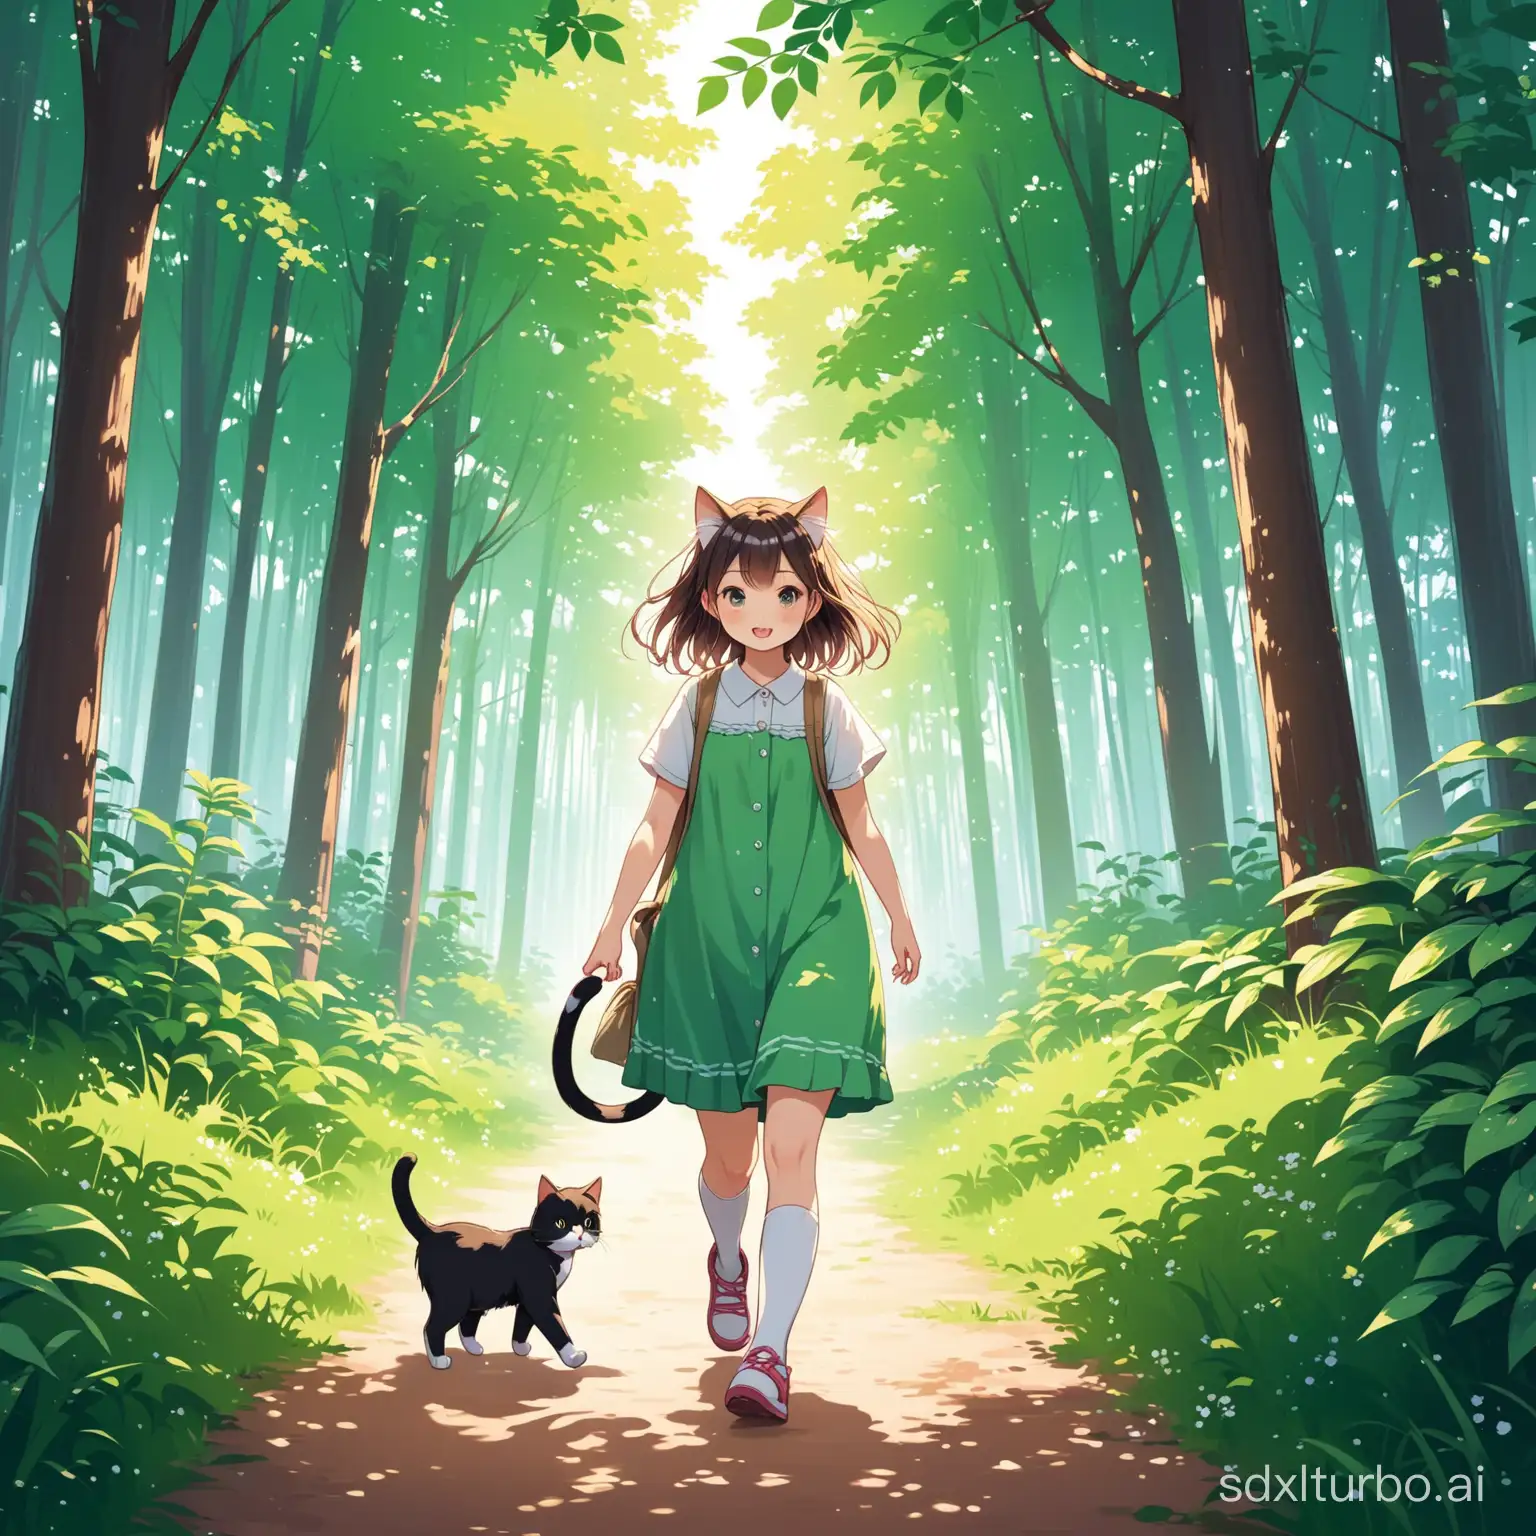 The girl cat is walking in the forest